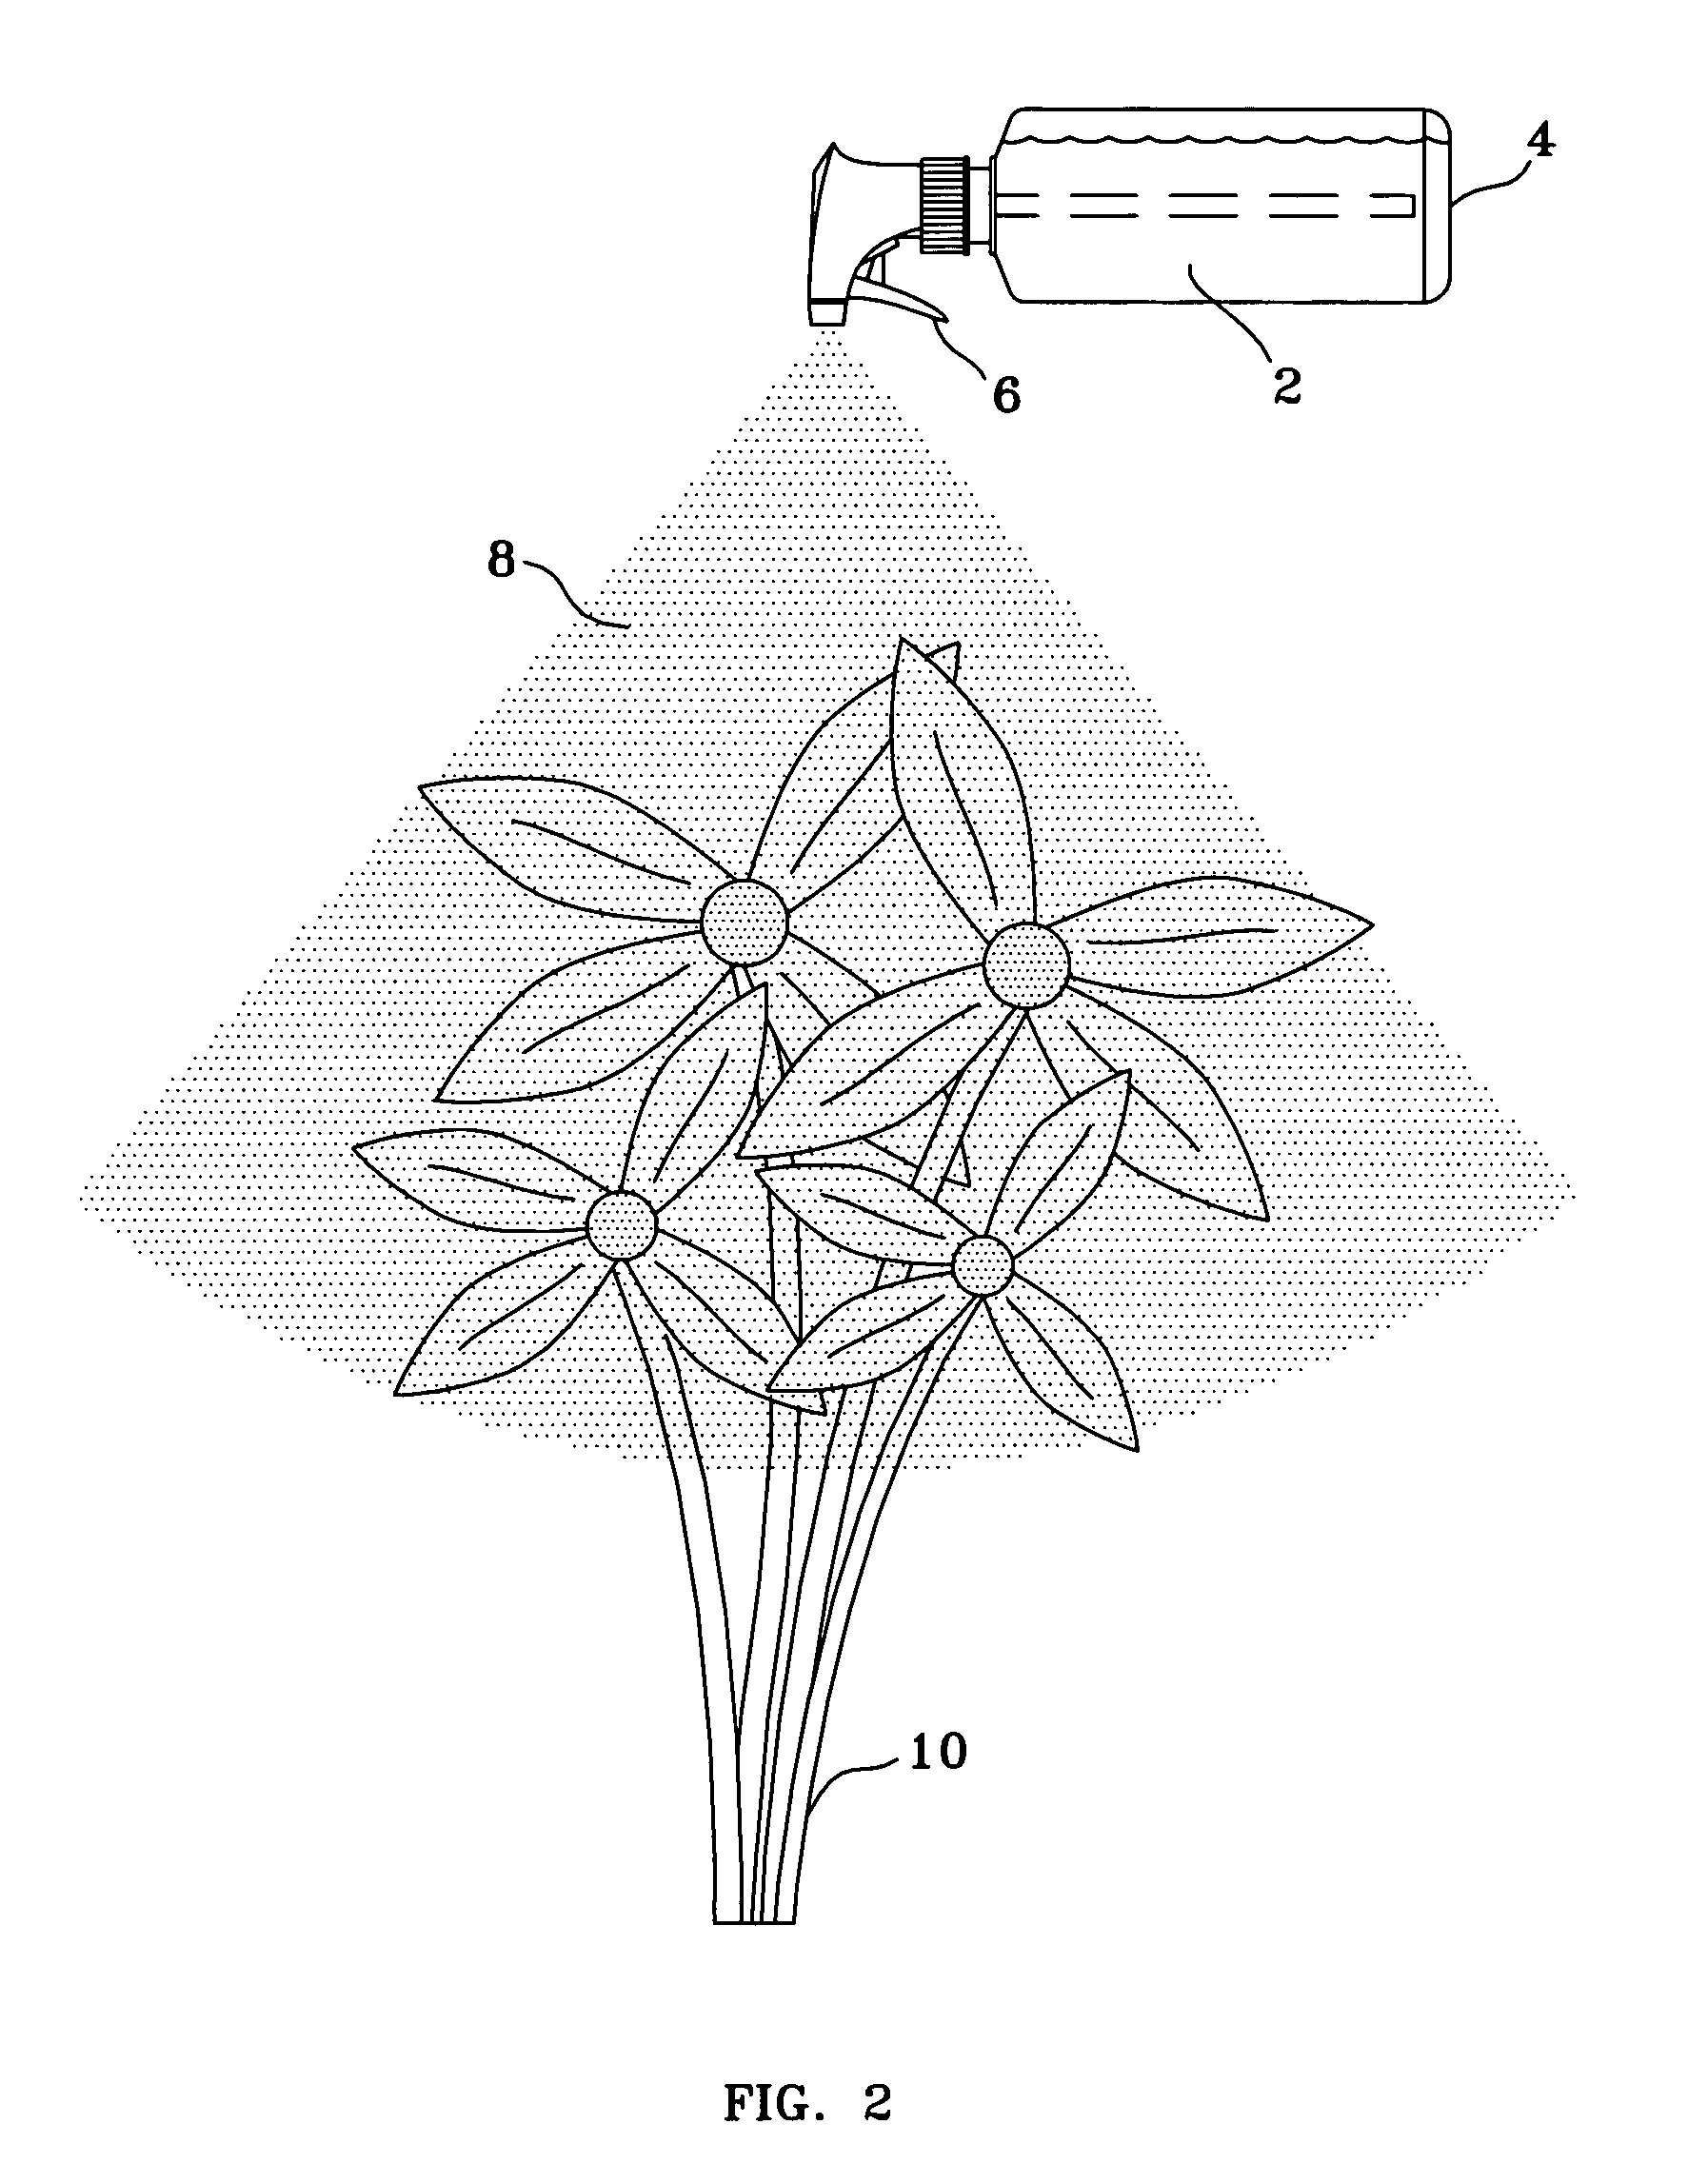 Floral preservative and method of use